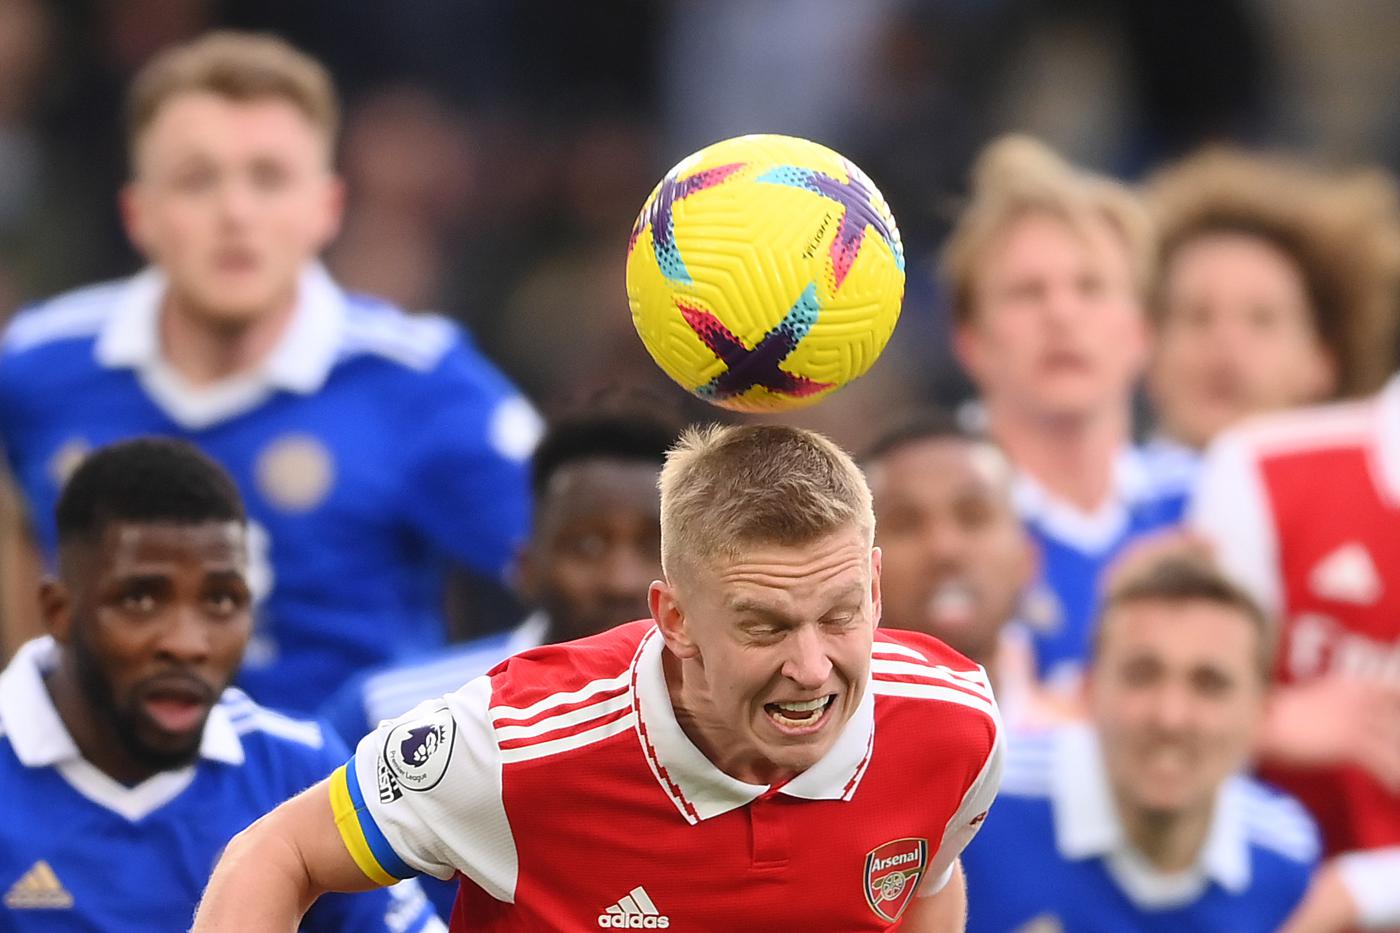 Leicester - Arsenal - 0:1. English Championship, 25th round. Match review, statistics